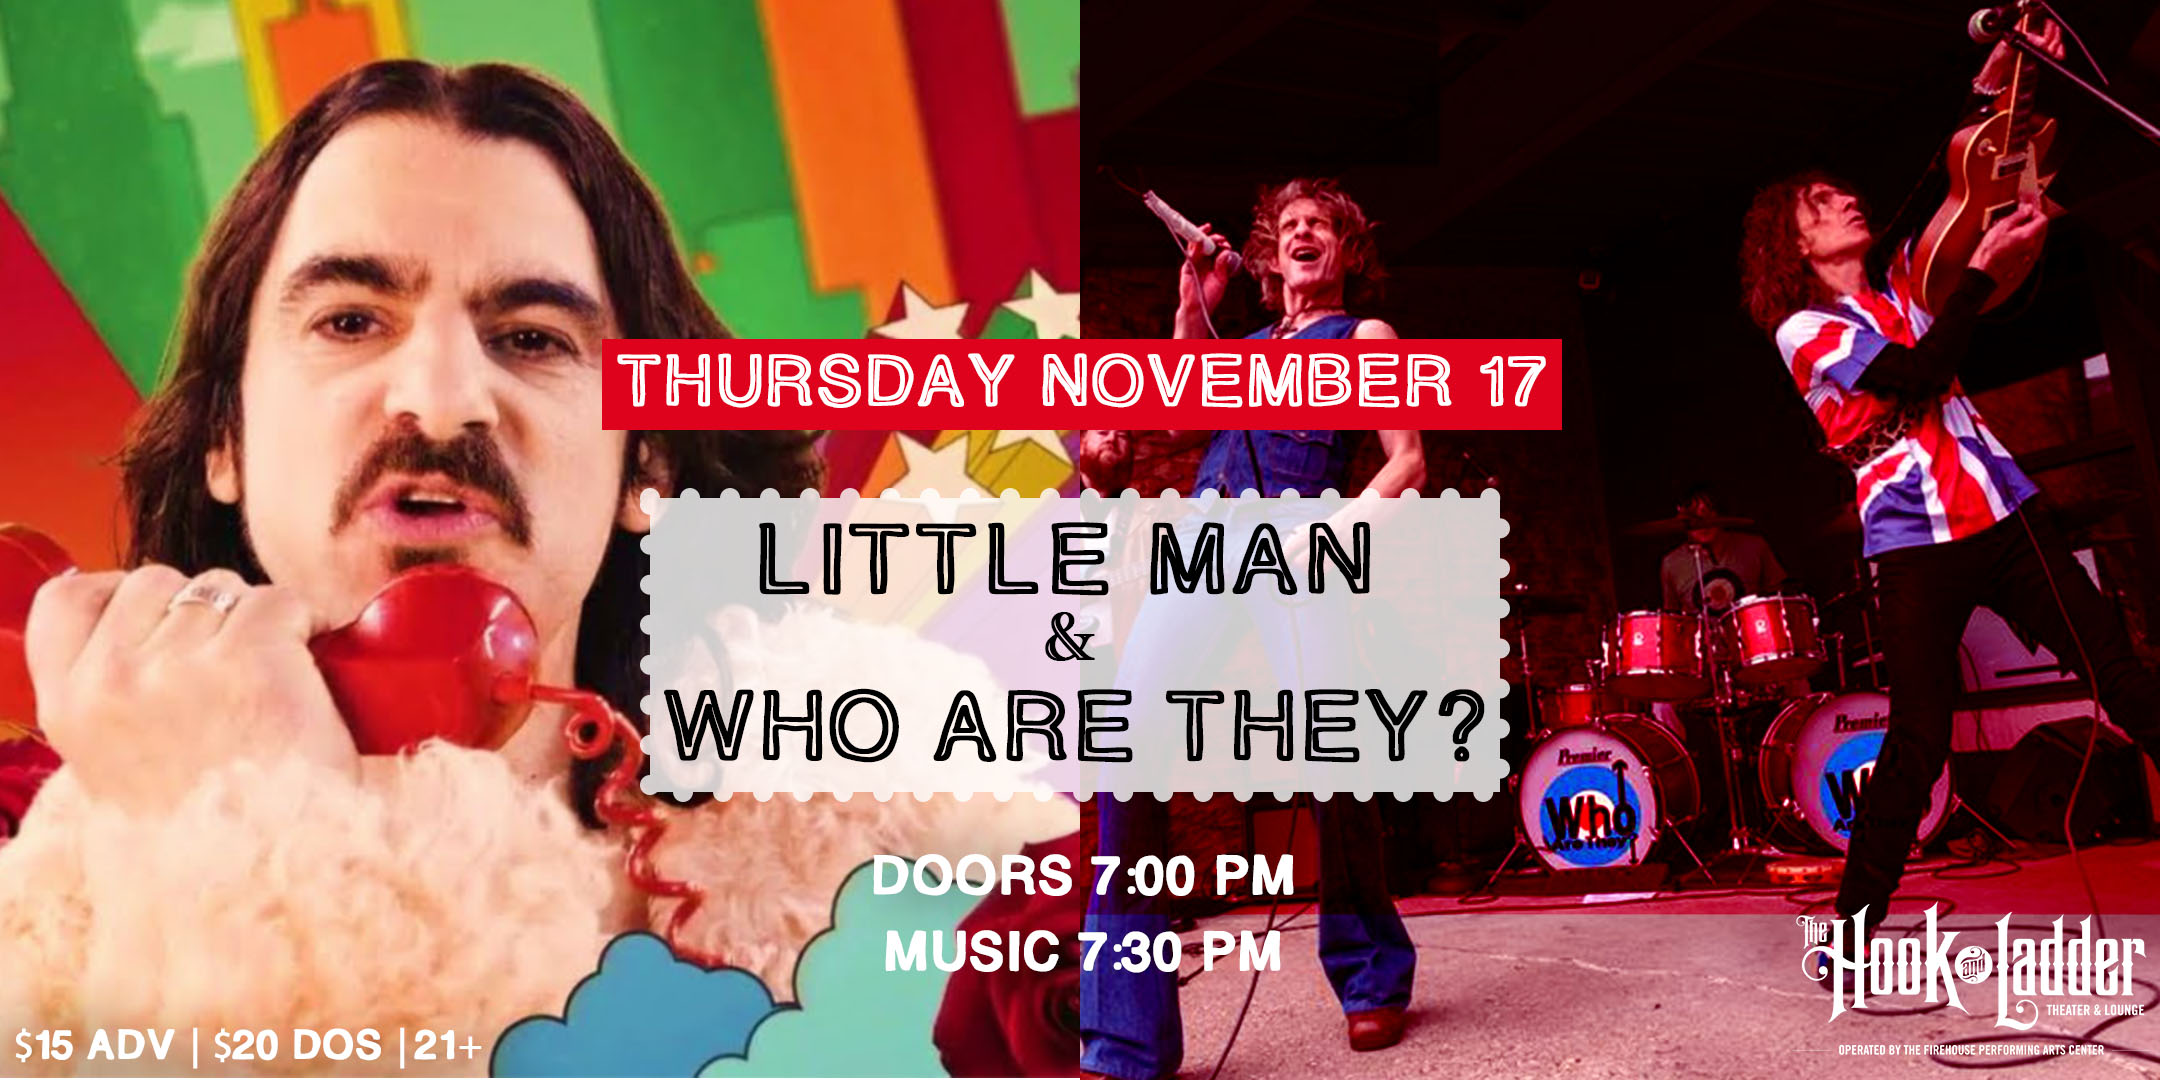 Who Are They? + Little Man Thursday, November 17, 2022 at The Hook and Ladder Theater Doors 7:00pm :: Music 7:30pm :: 21+ GA: $15 Advance :: $20 Day of Show